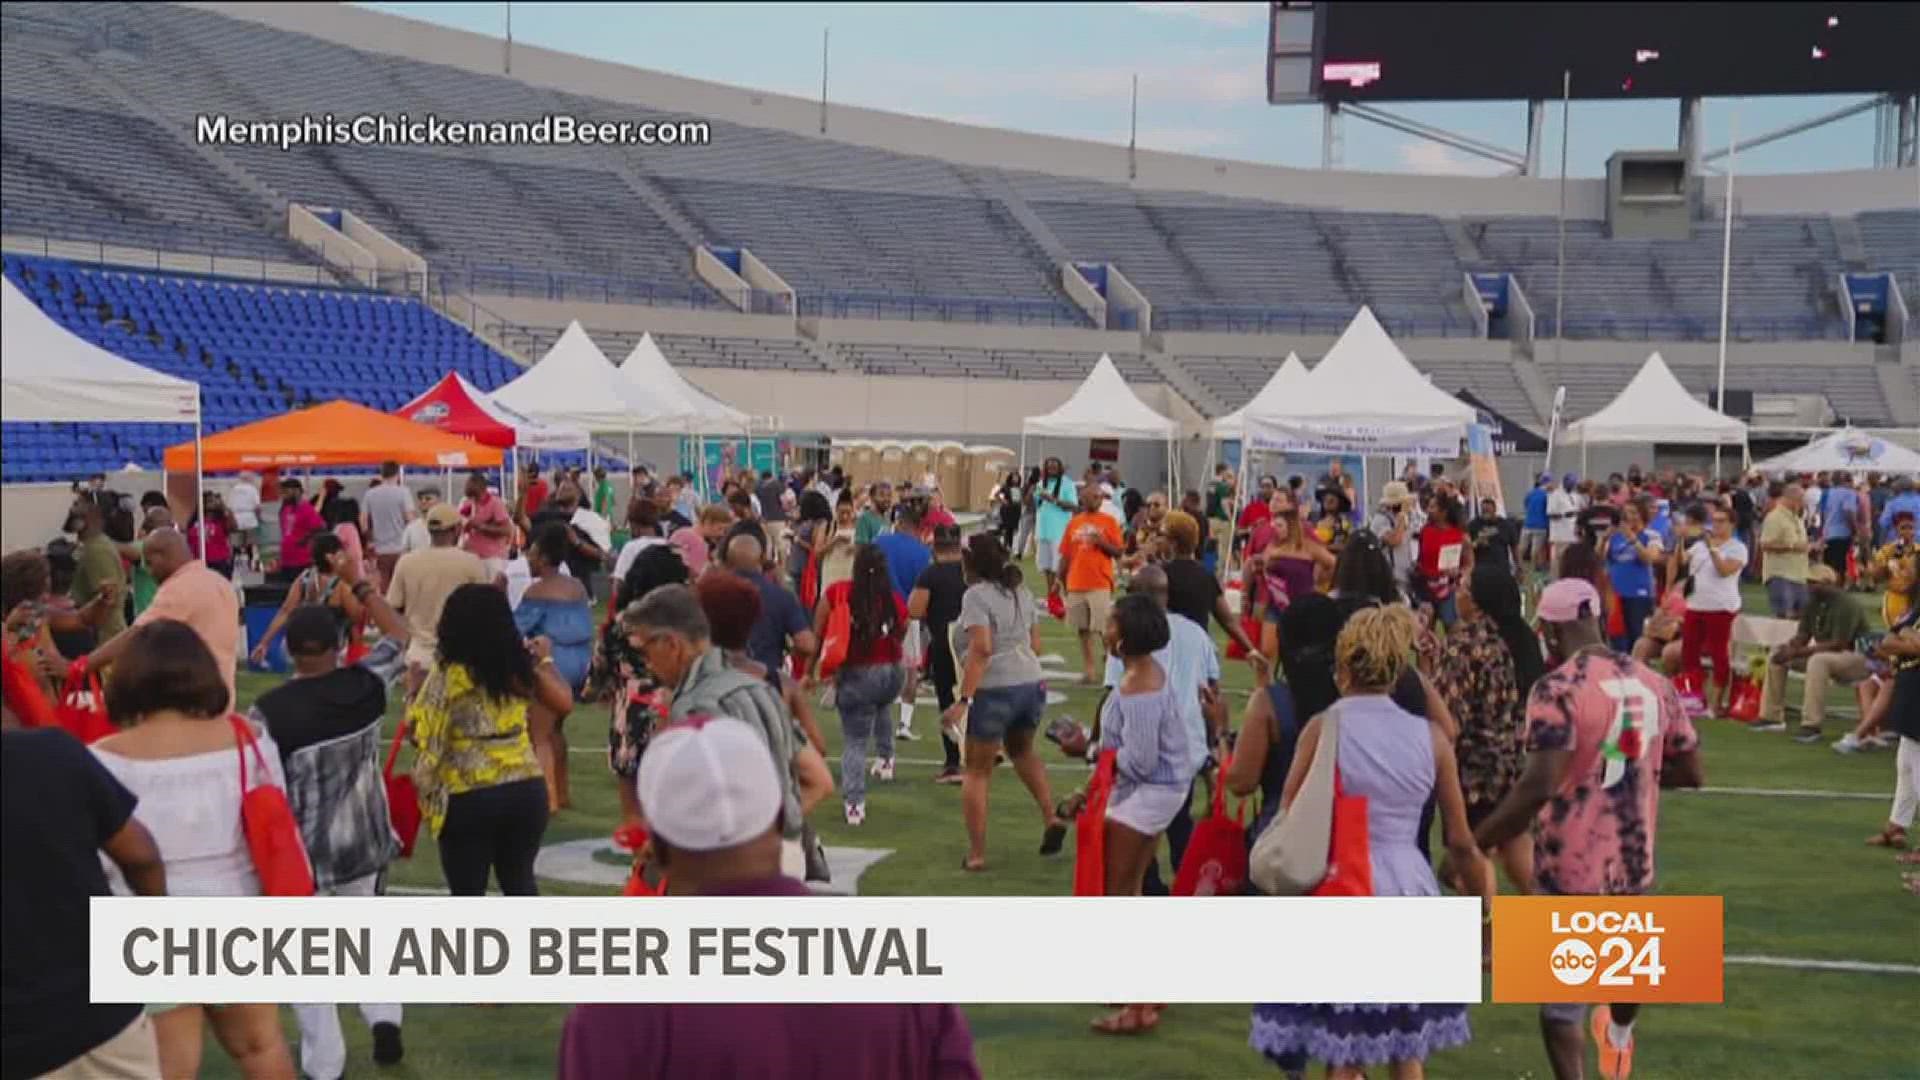 Get your fix at Memphis Chicken and Beer Festival